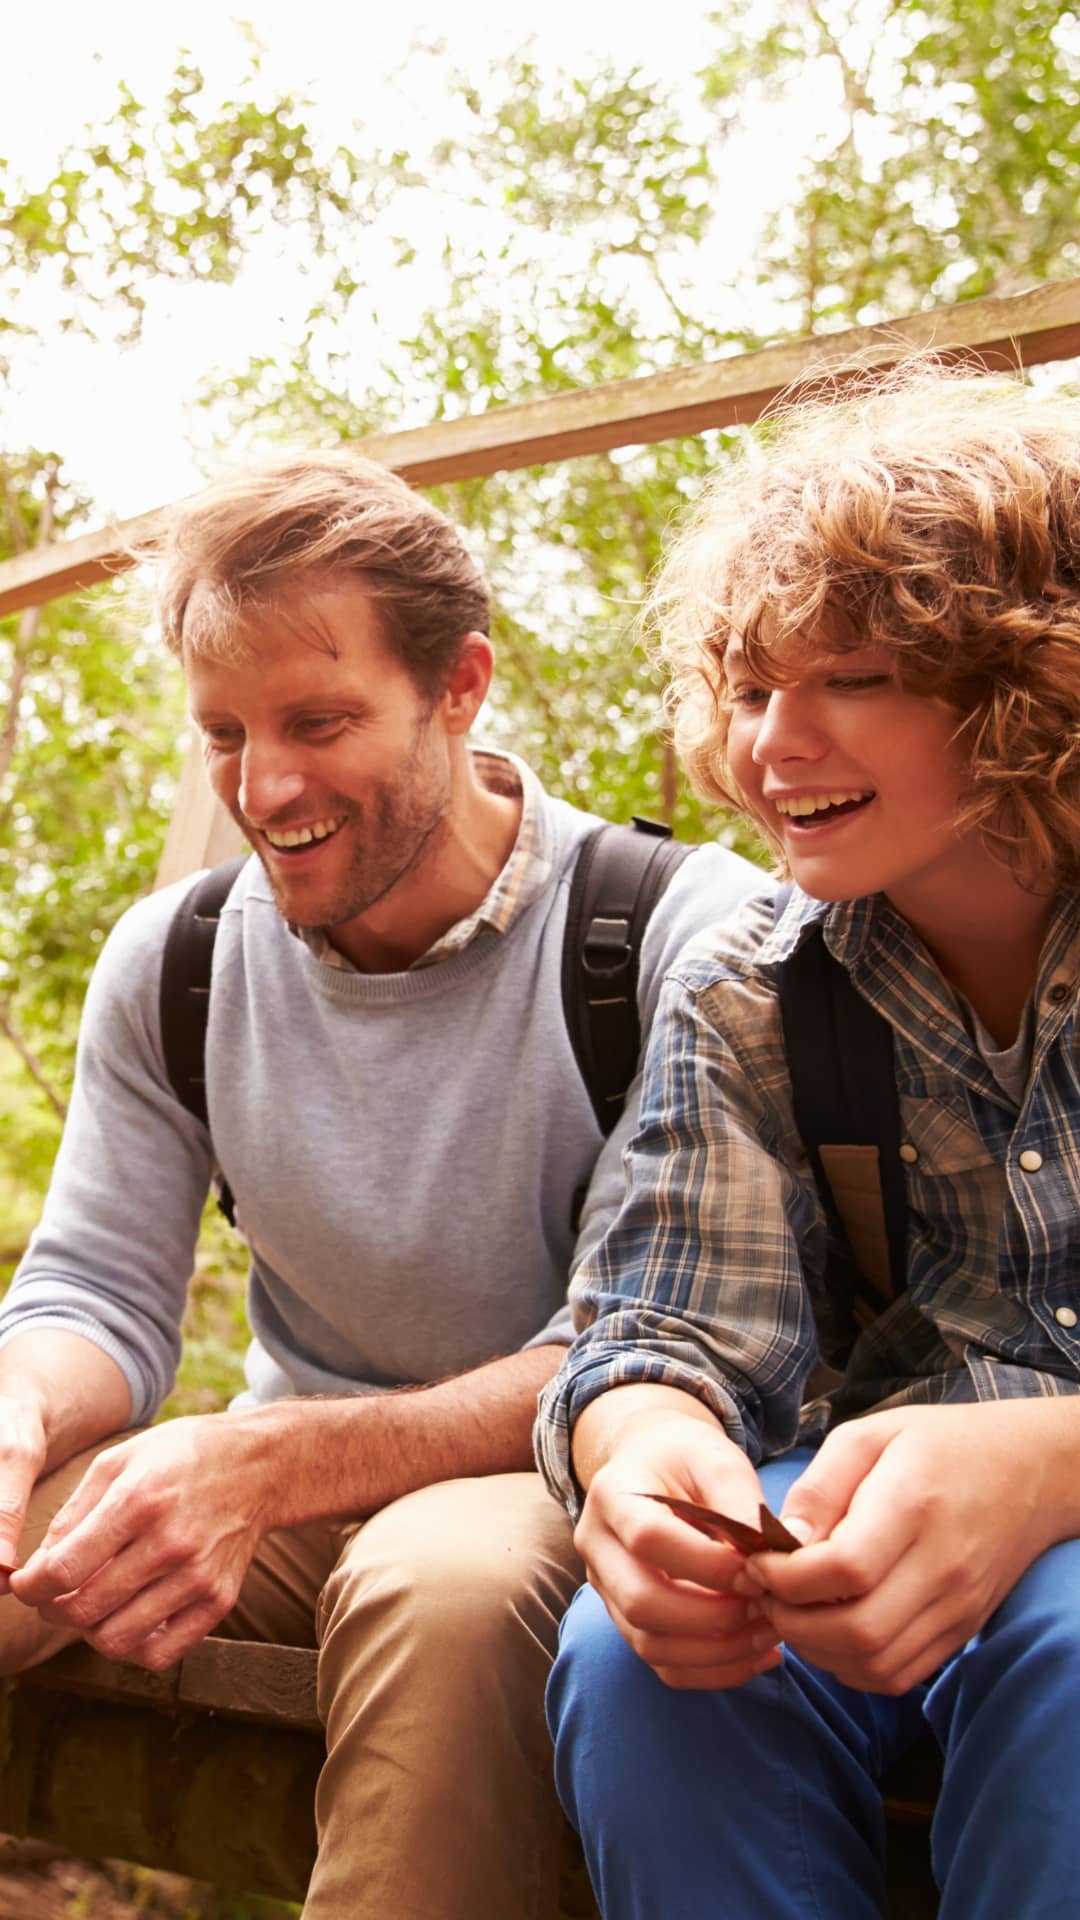 A father and son wearing backpacks sitting close together in nature smiling and experiencing an authentic connection.